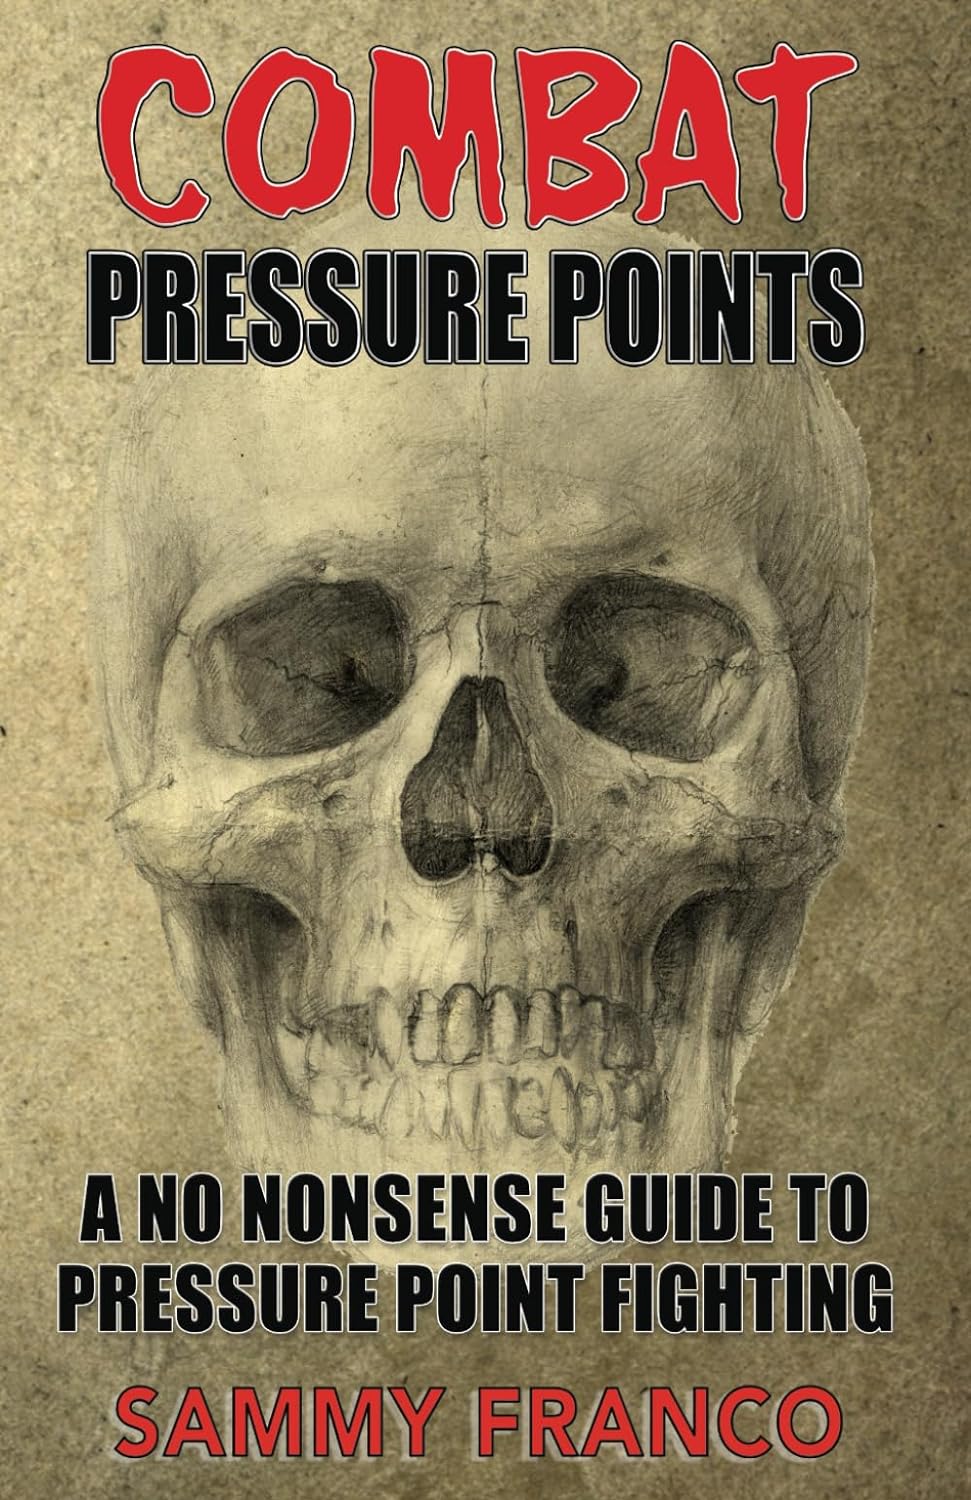 Combat Pressure Points: A No Nonsense Guide To Pressure Point Fighting for Self-Defense Book by Sammy Franco